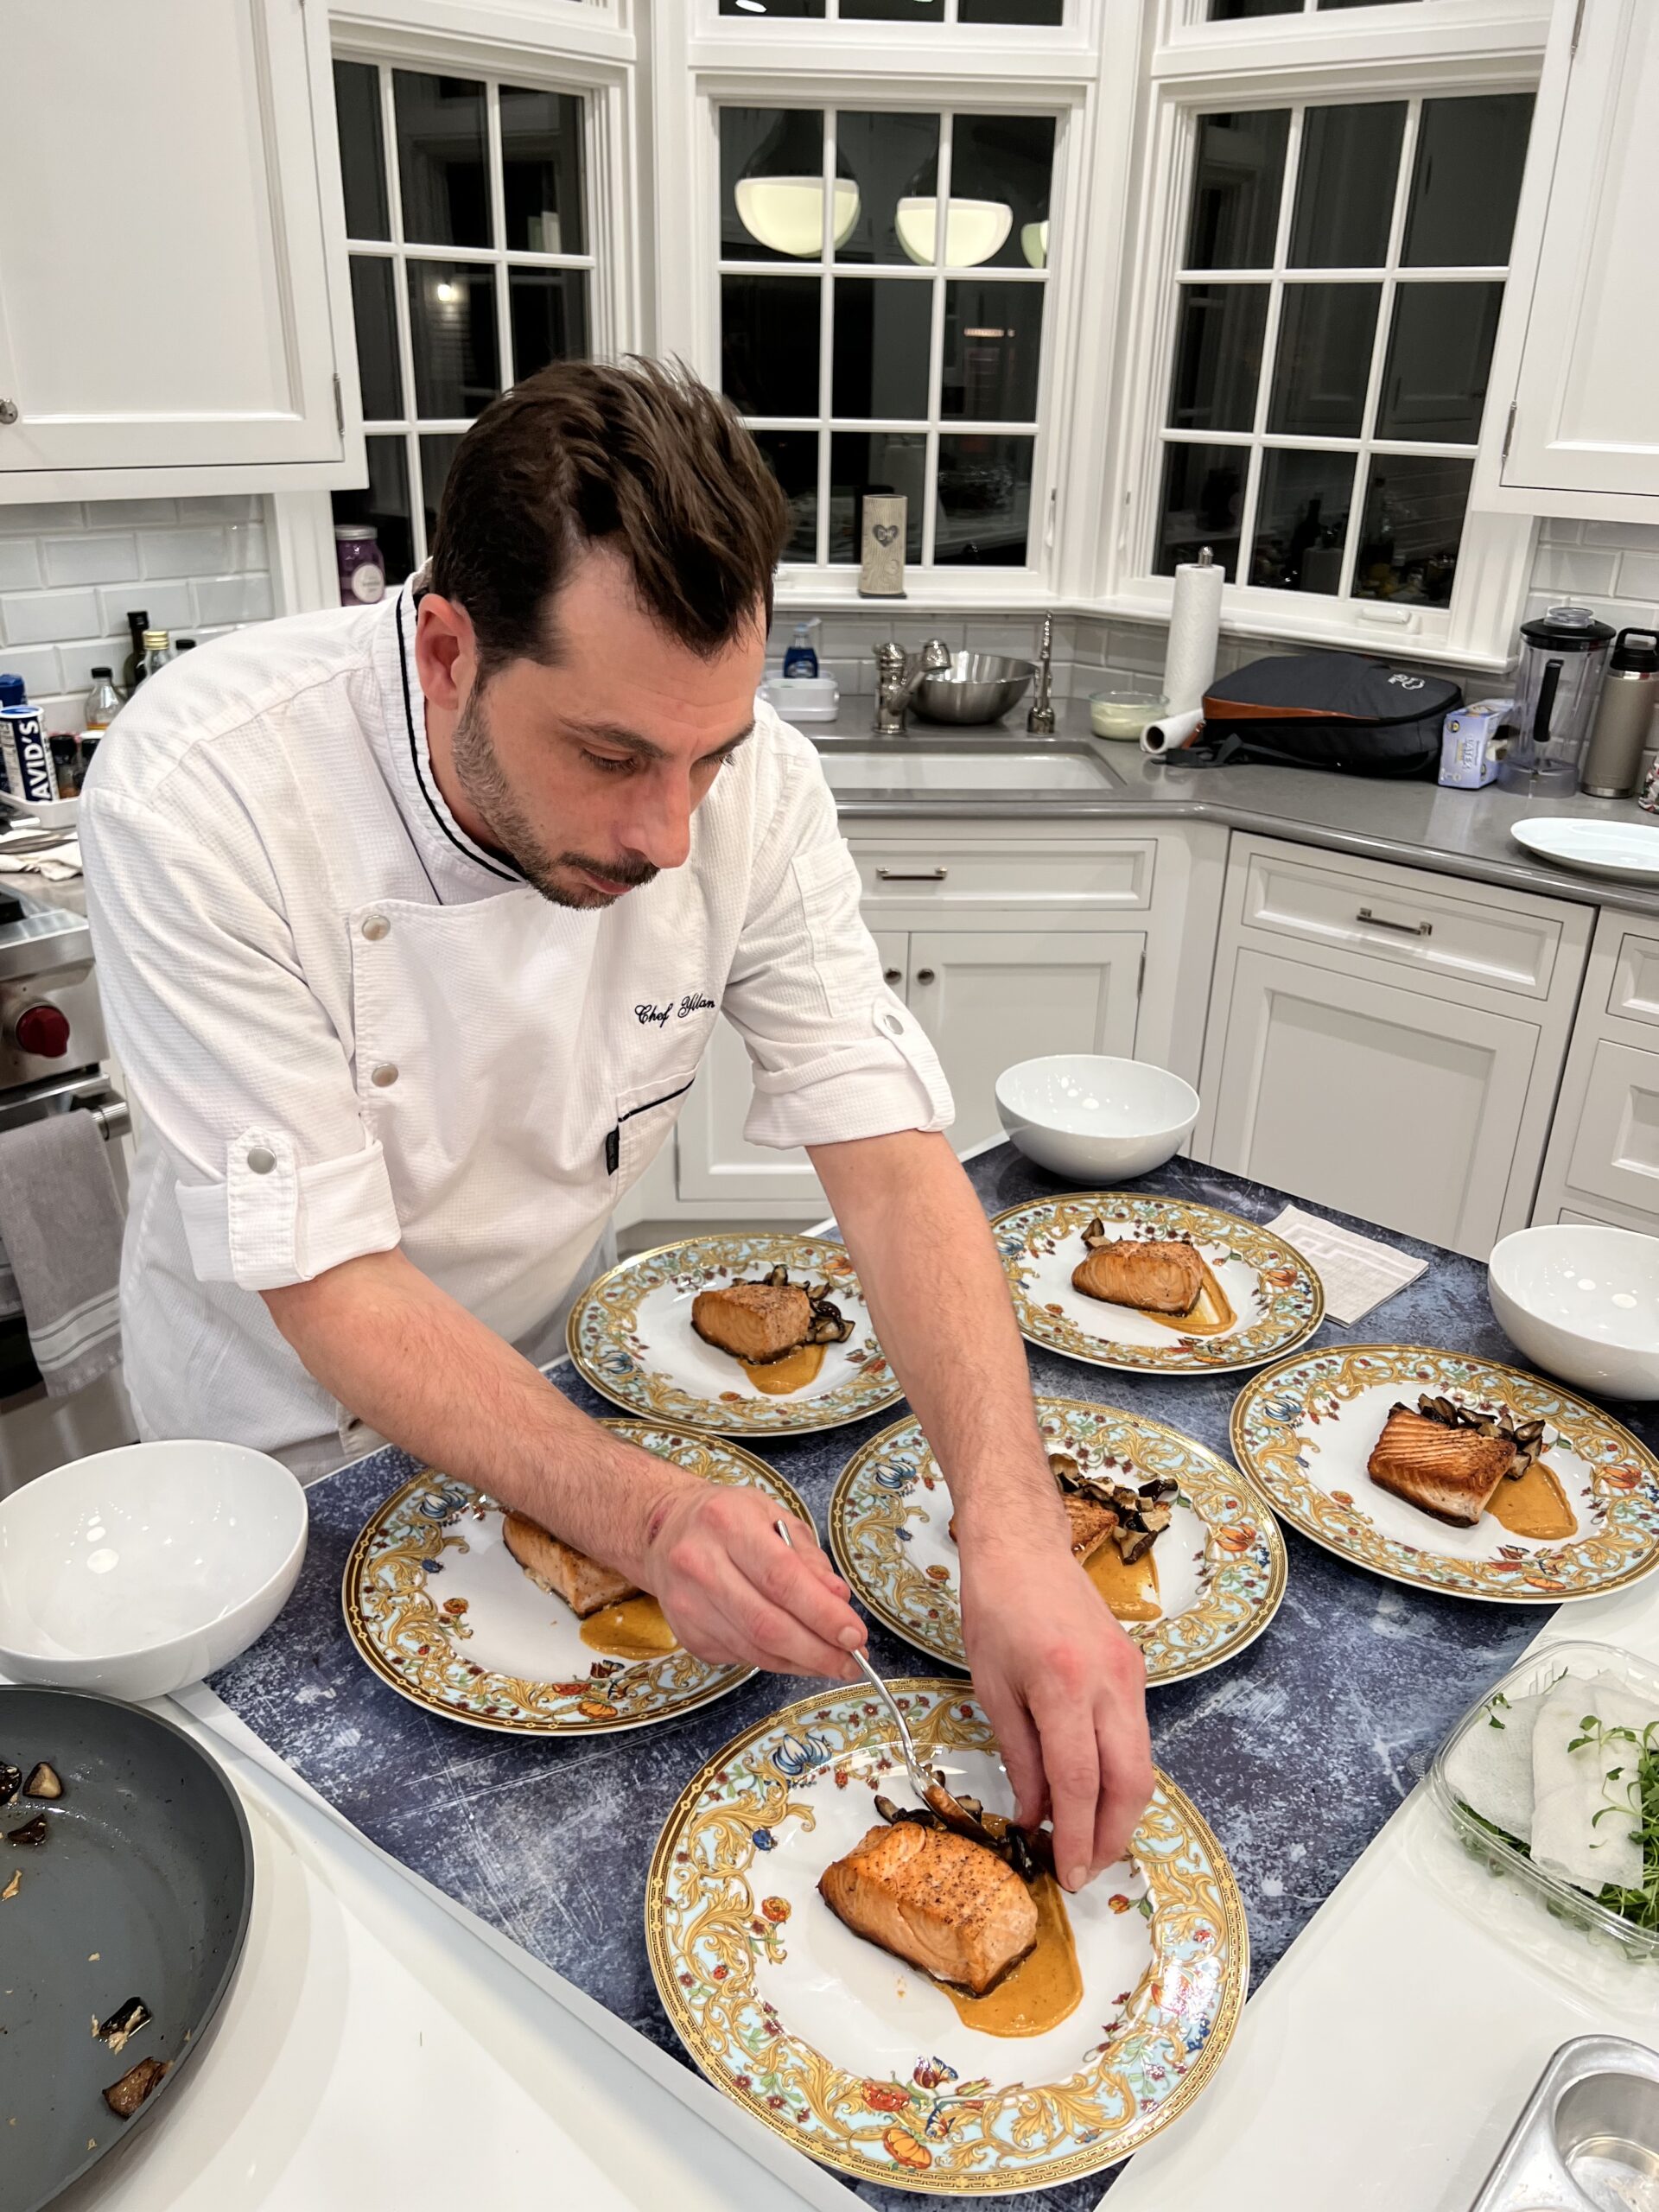 Chef Yllan Laloum prepares a private dinner party for one his Kosher clients in New York.